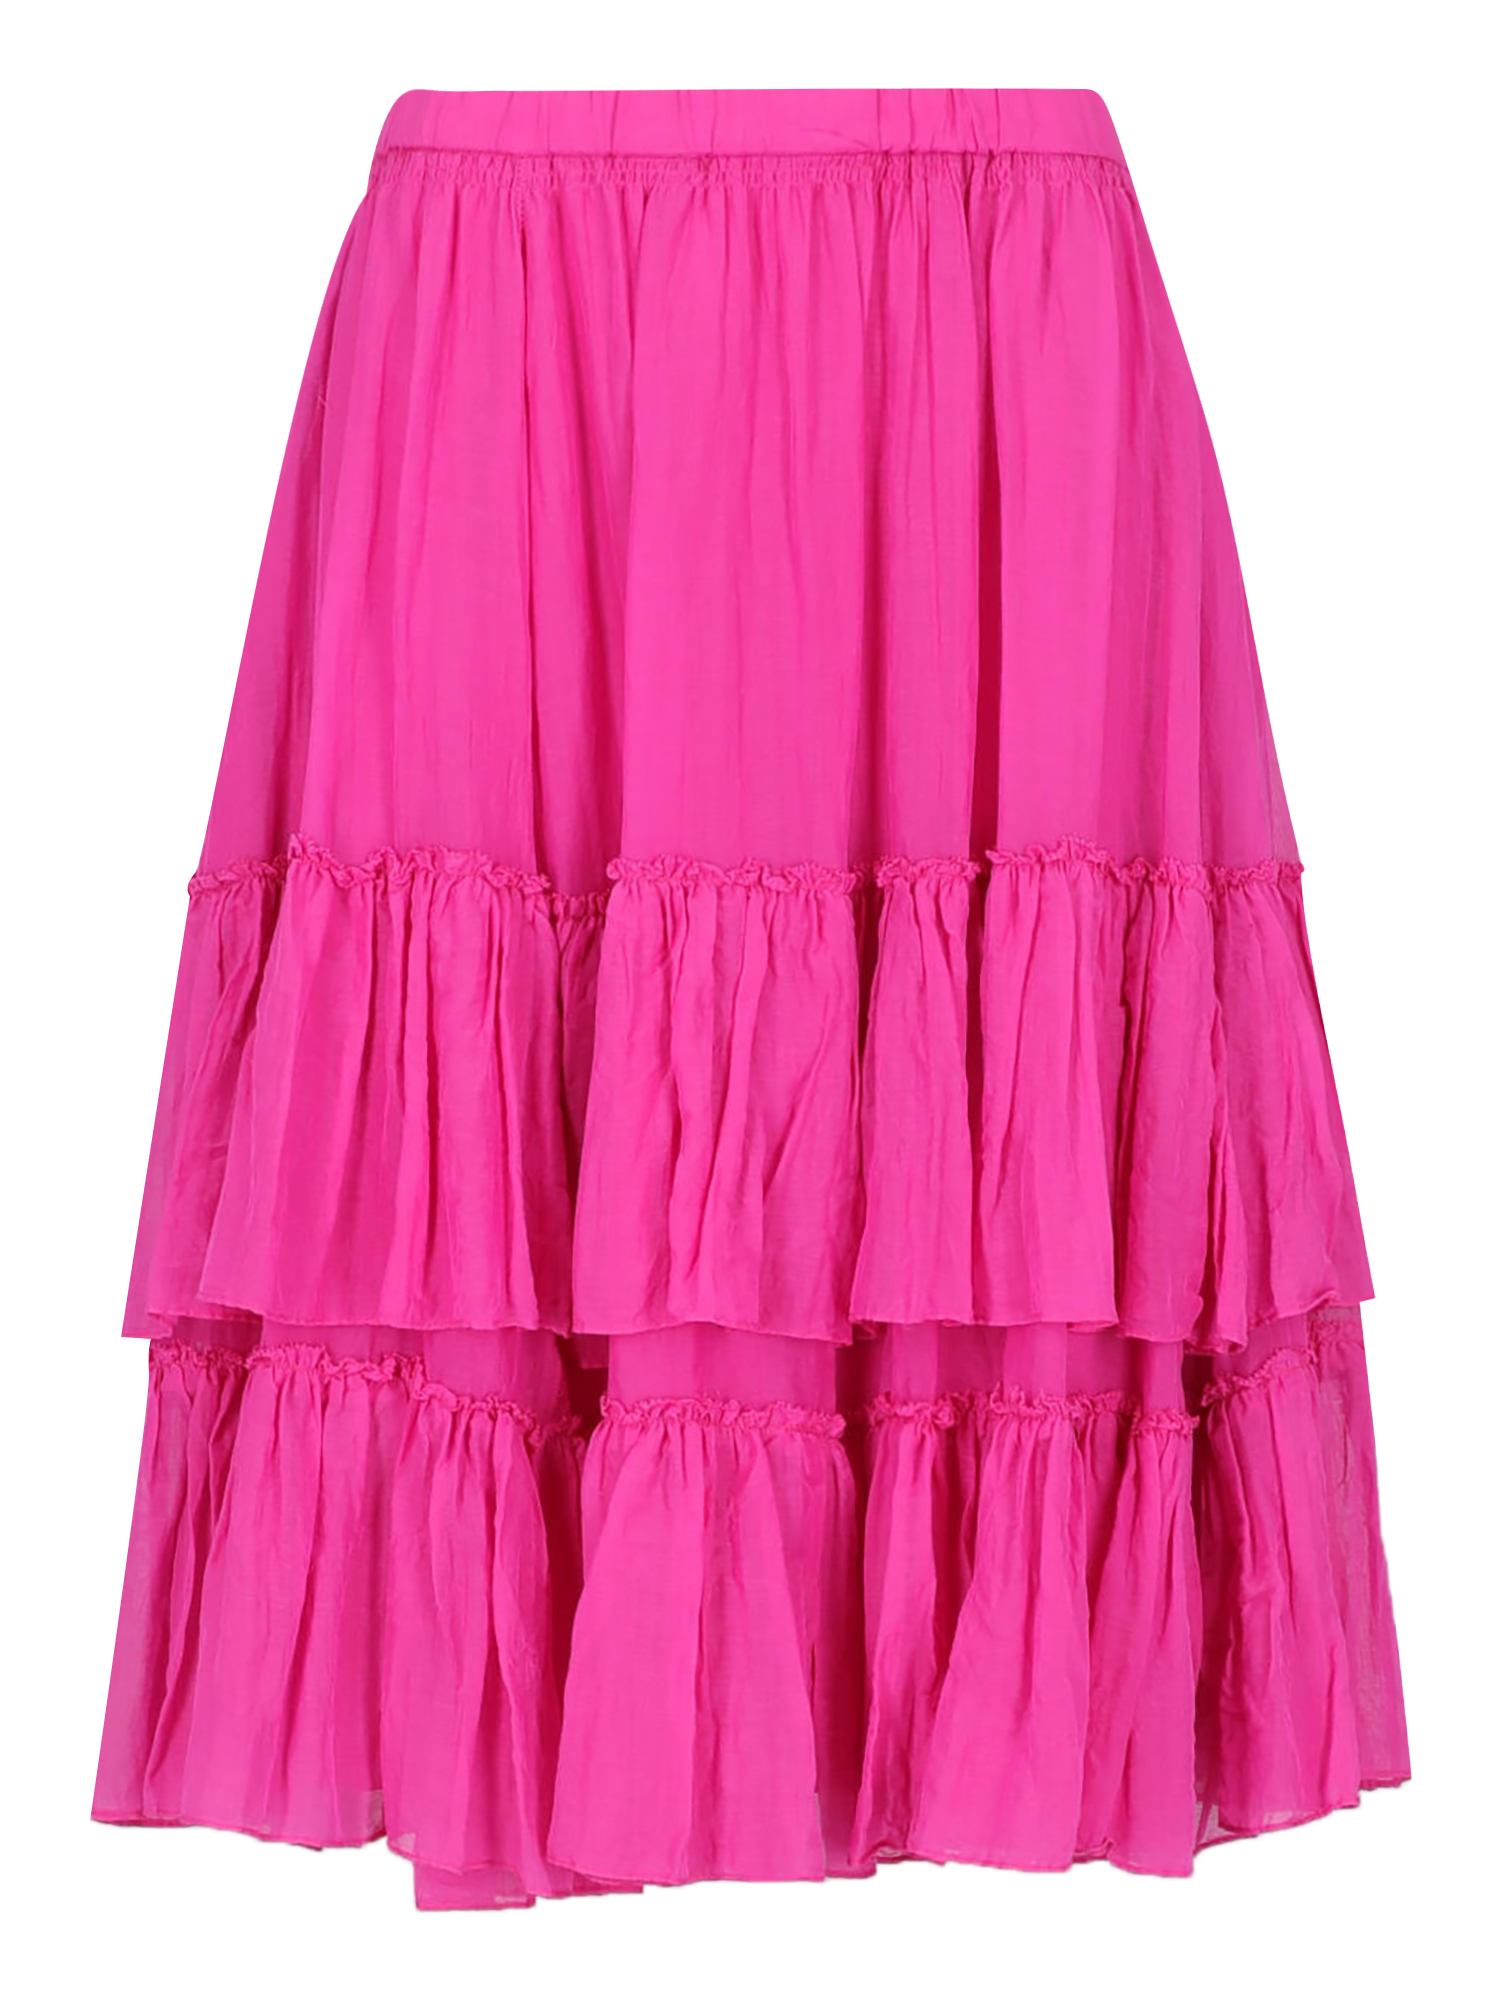 Condition: Very Good, Solid Color Cotton, Color: Pink - M - US 6 -